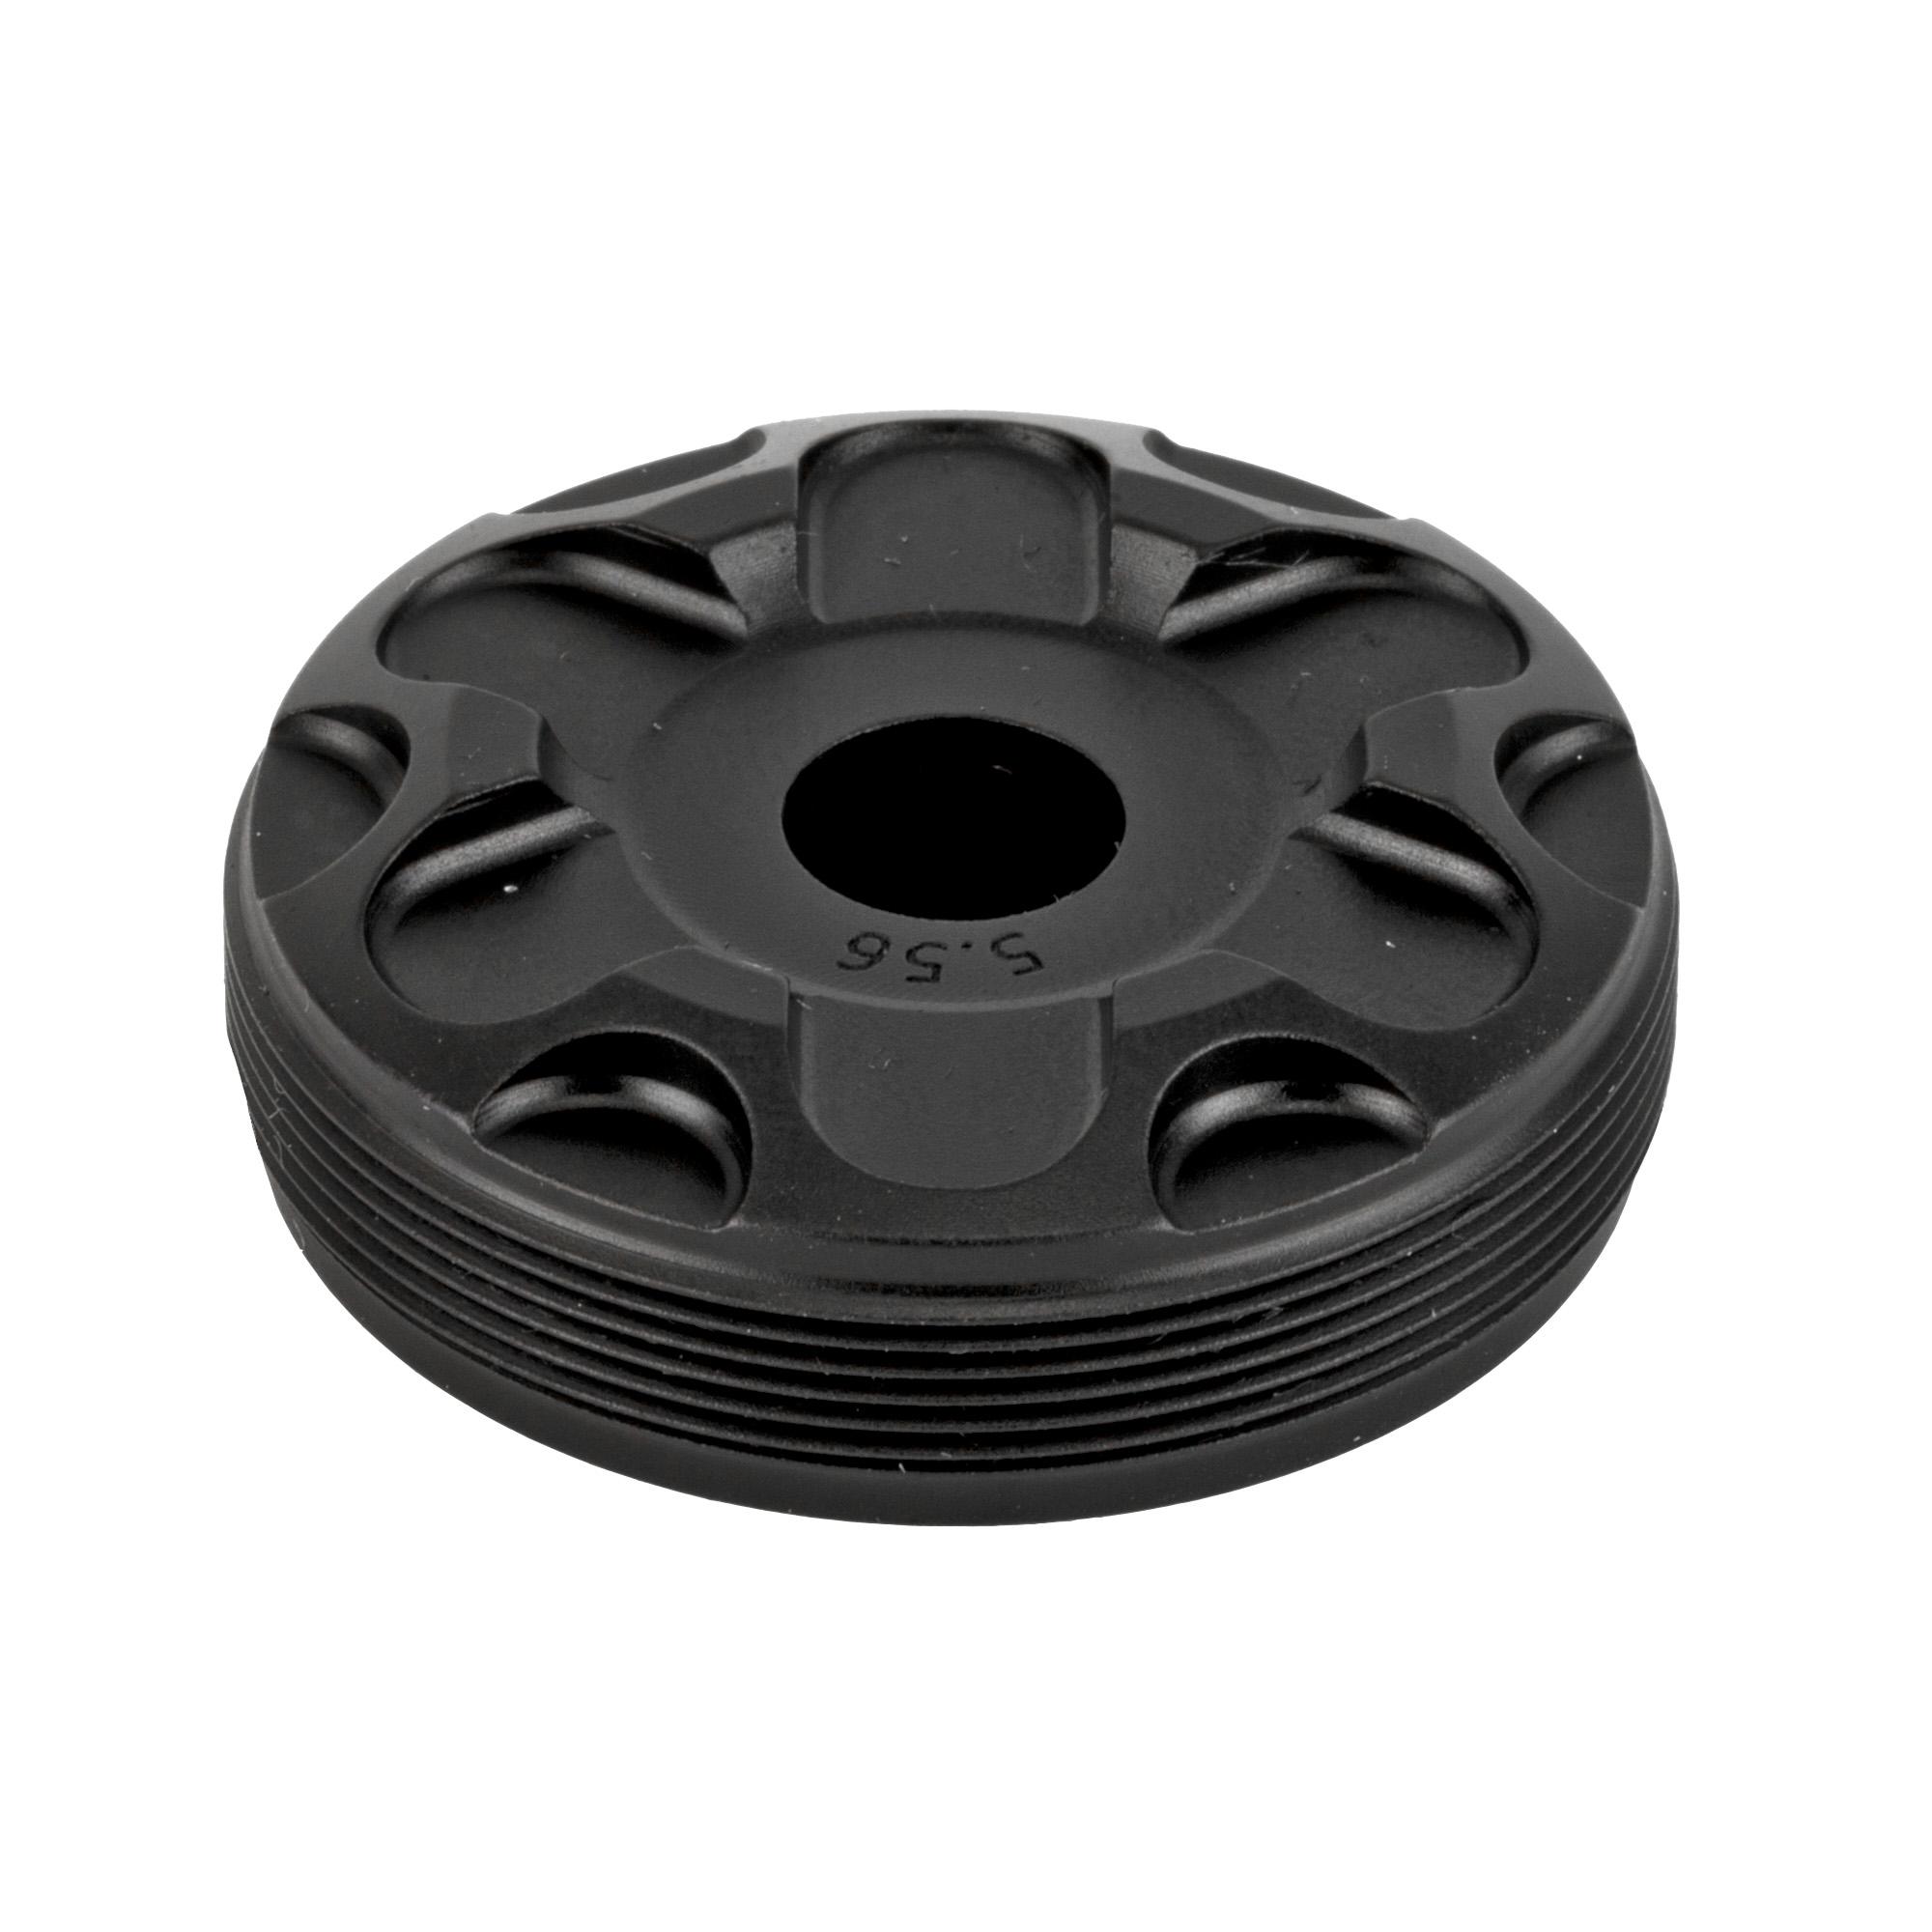 Rugged Suppressors Rugged Front Cap 5.56